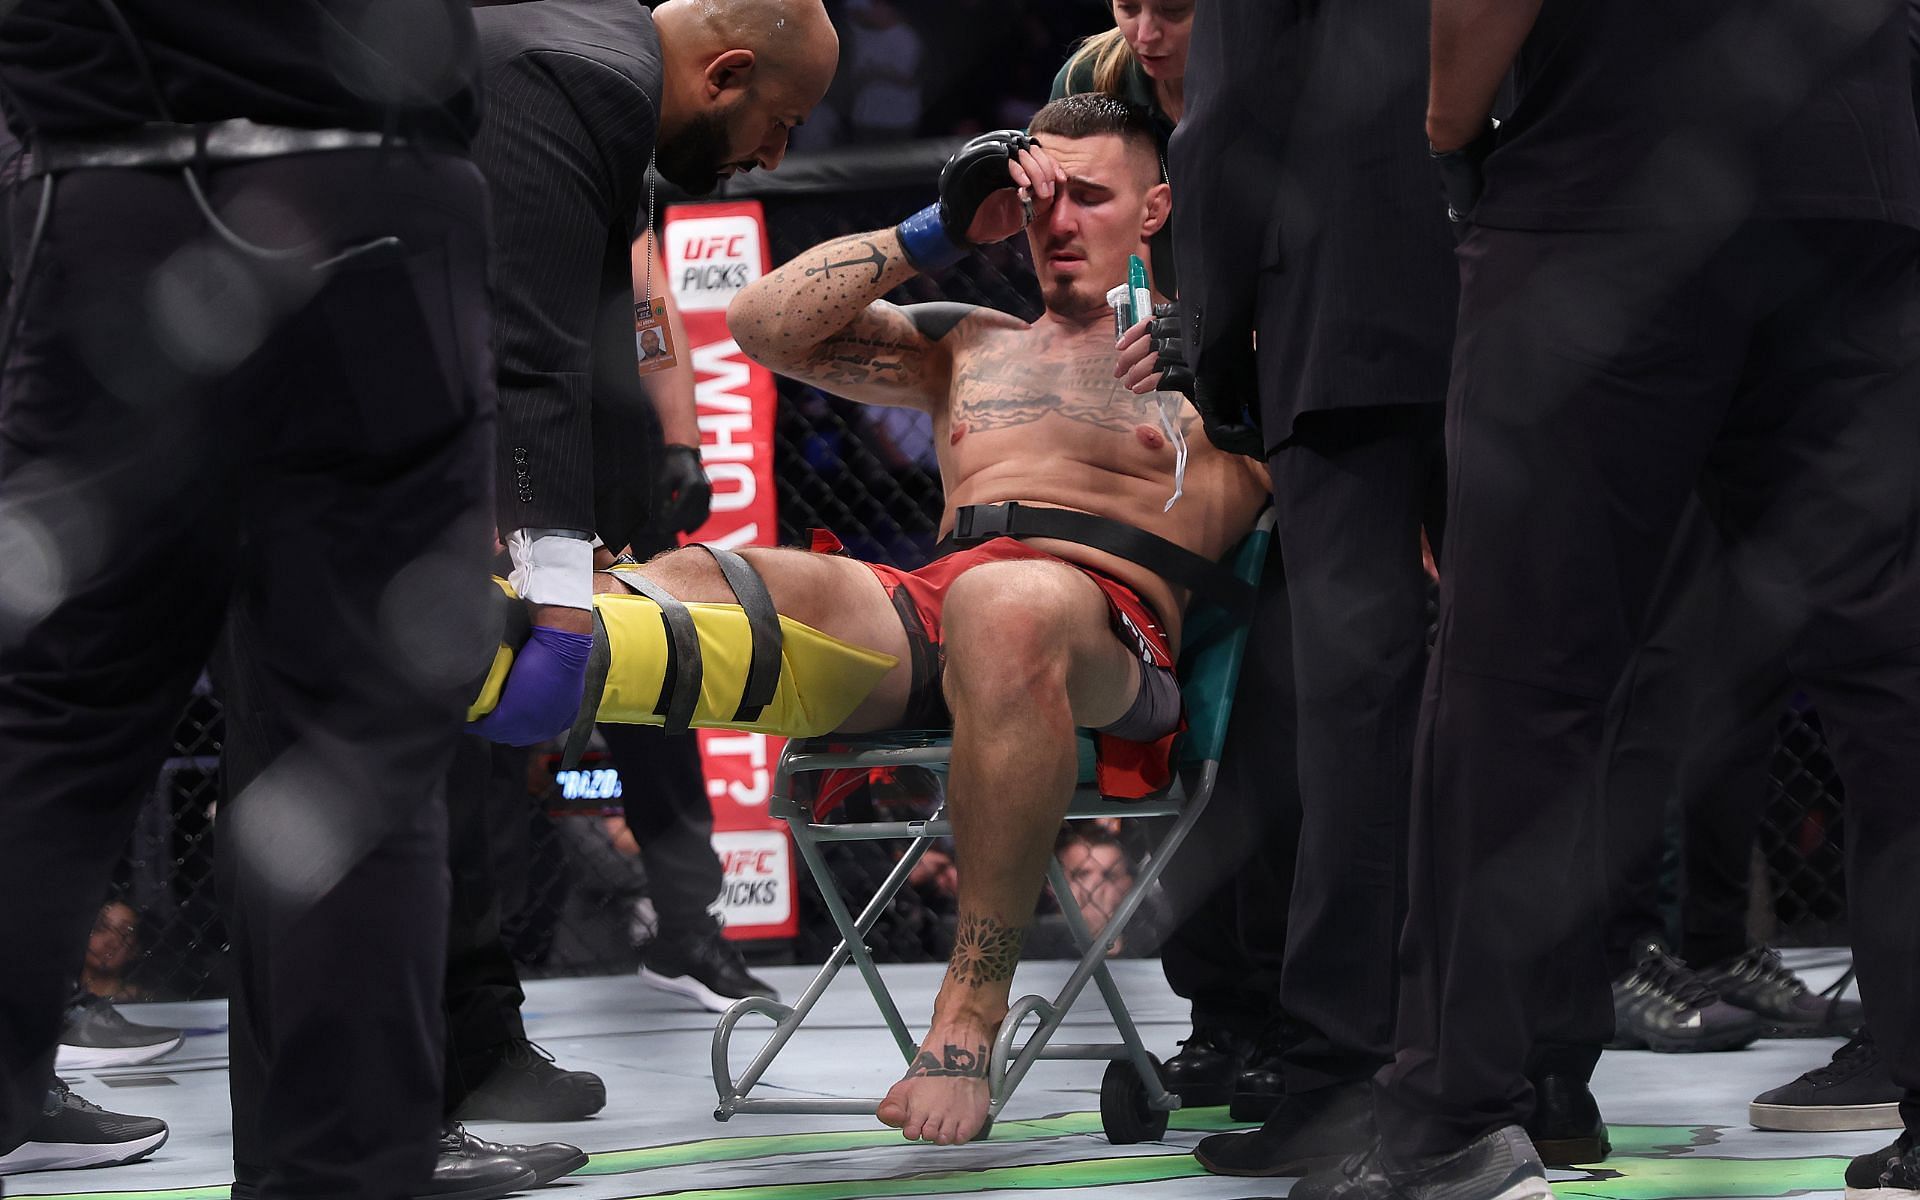 Tom Aspinall after his knee injury against Curtis Blaydes [Image courtesy: Getty]